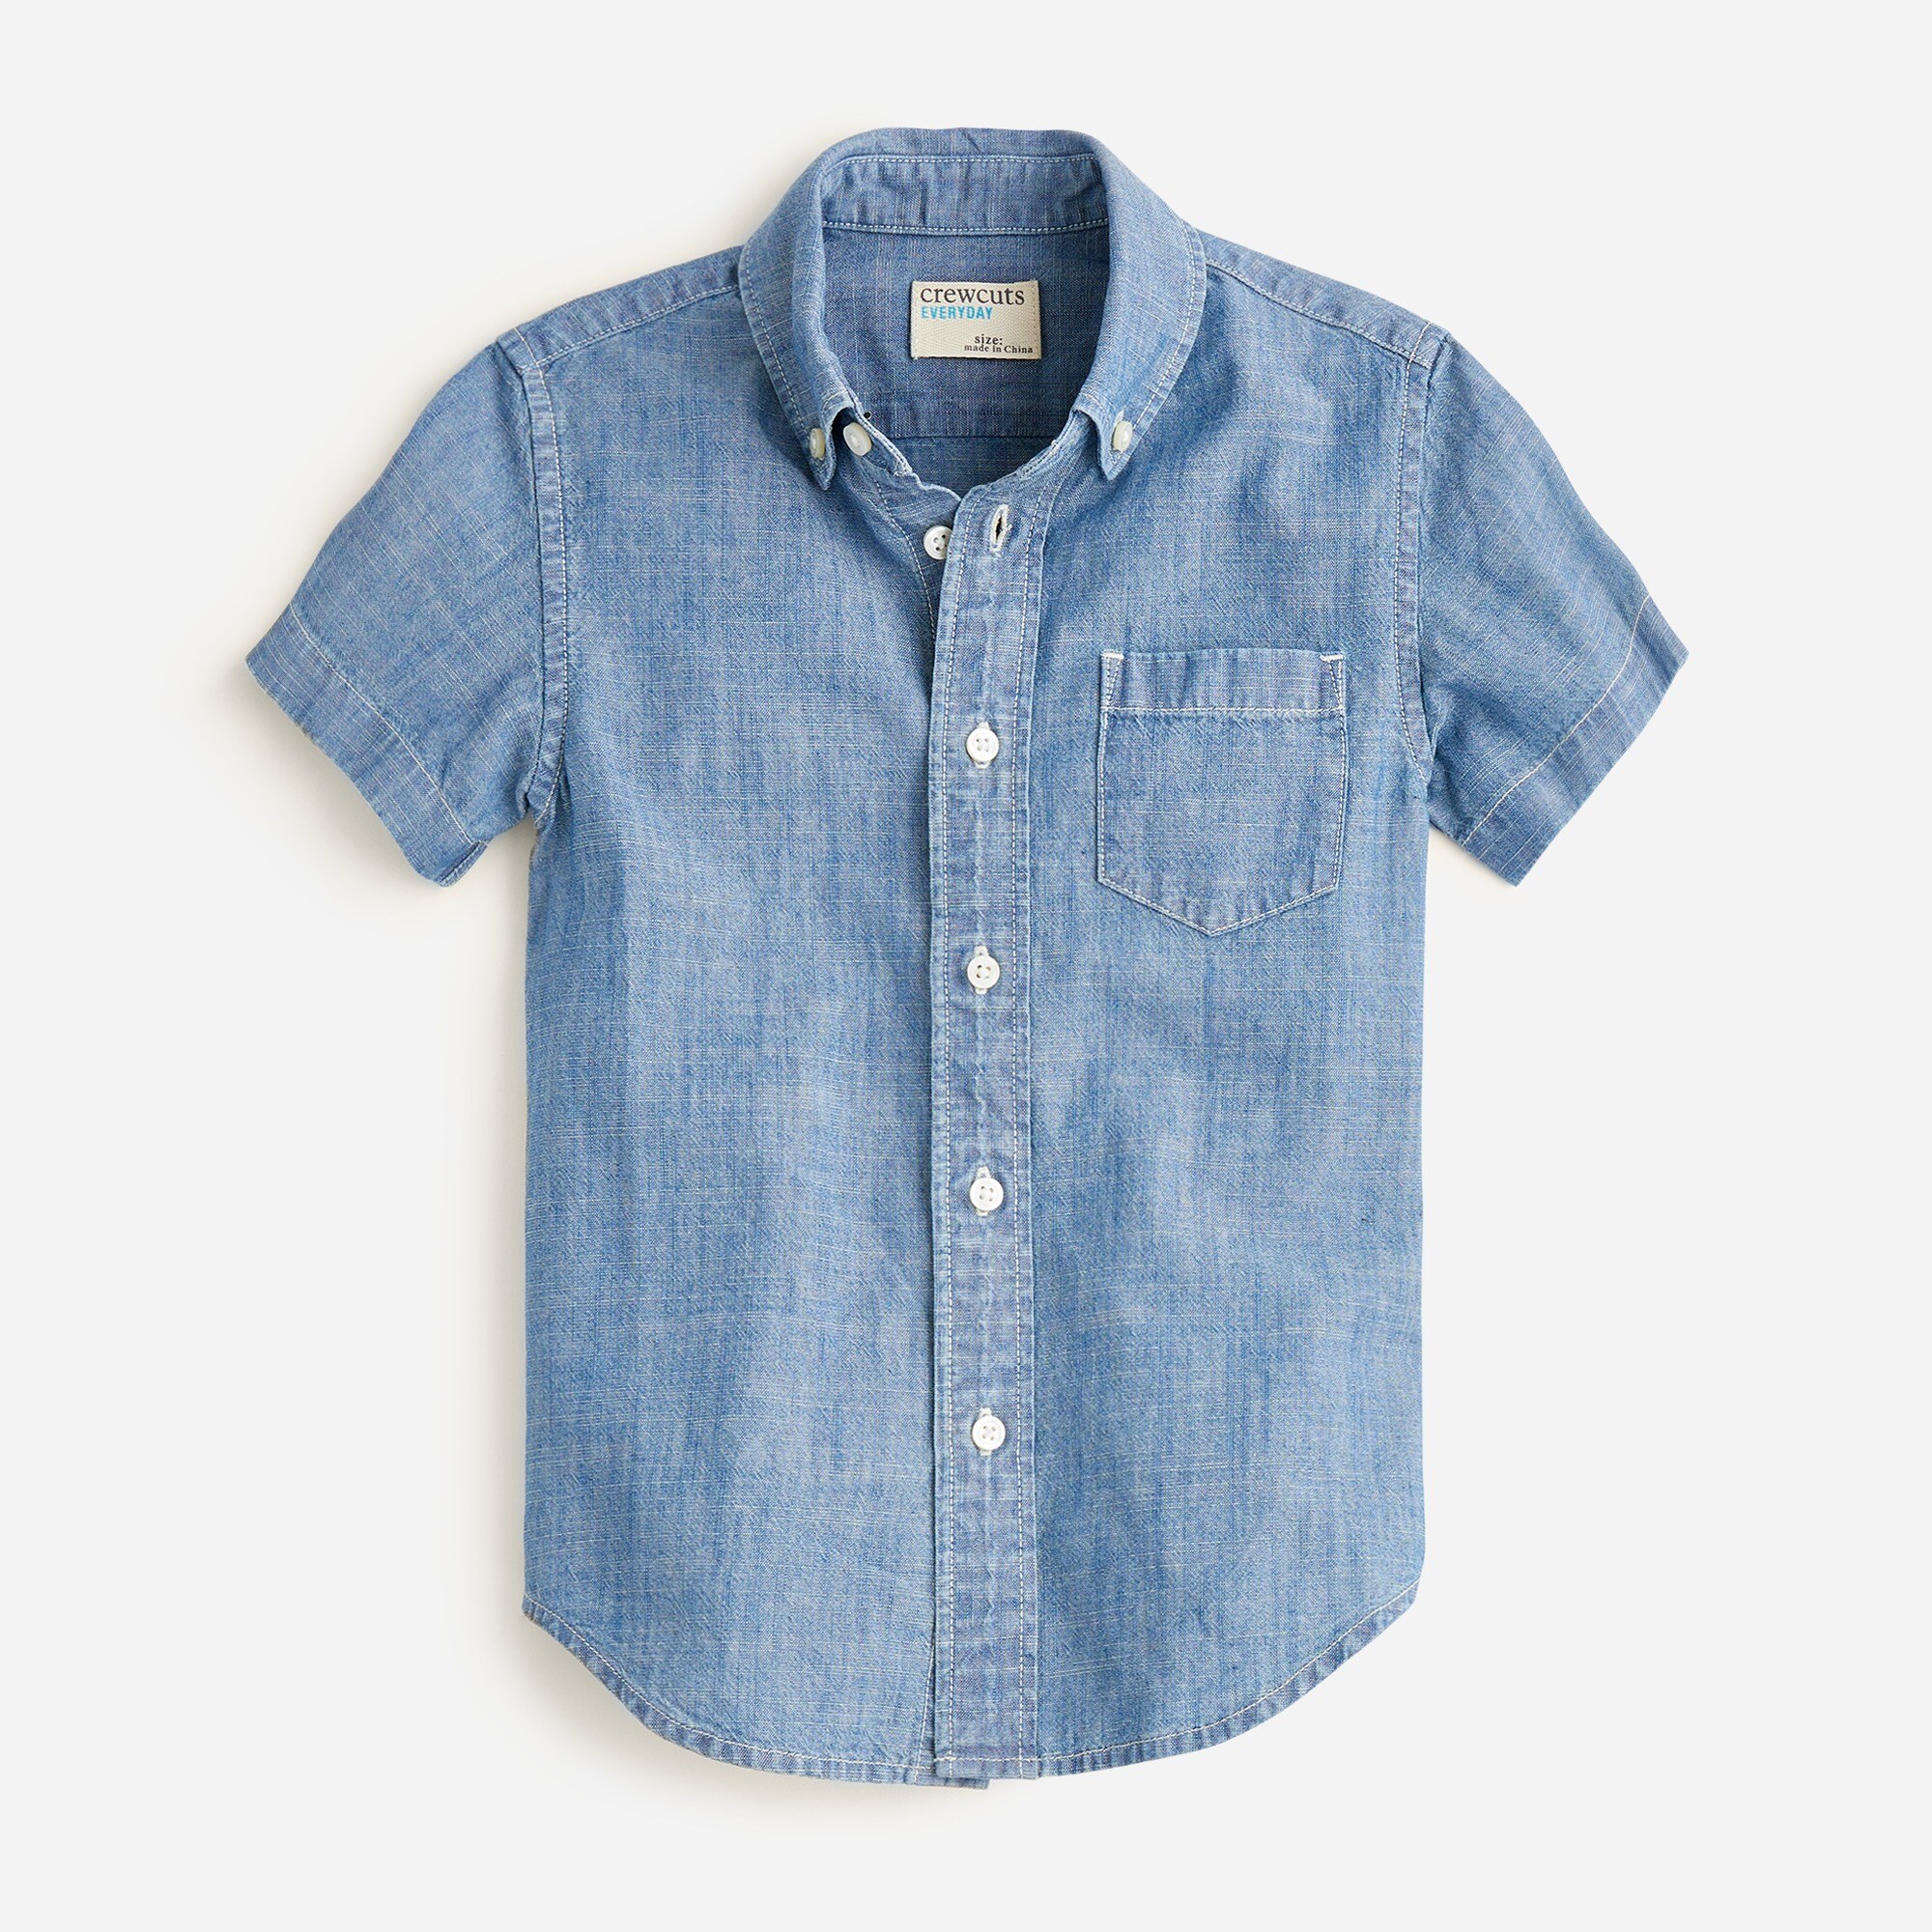  Kids&apos; short-sleeve chambray button-down